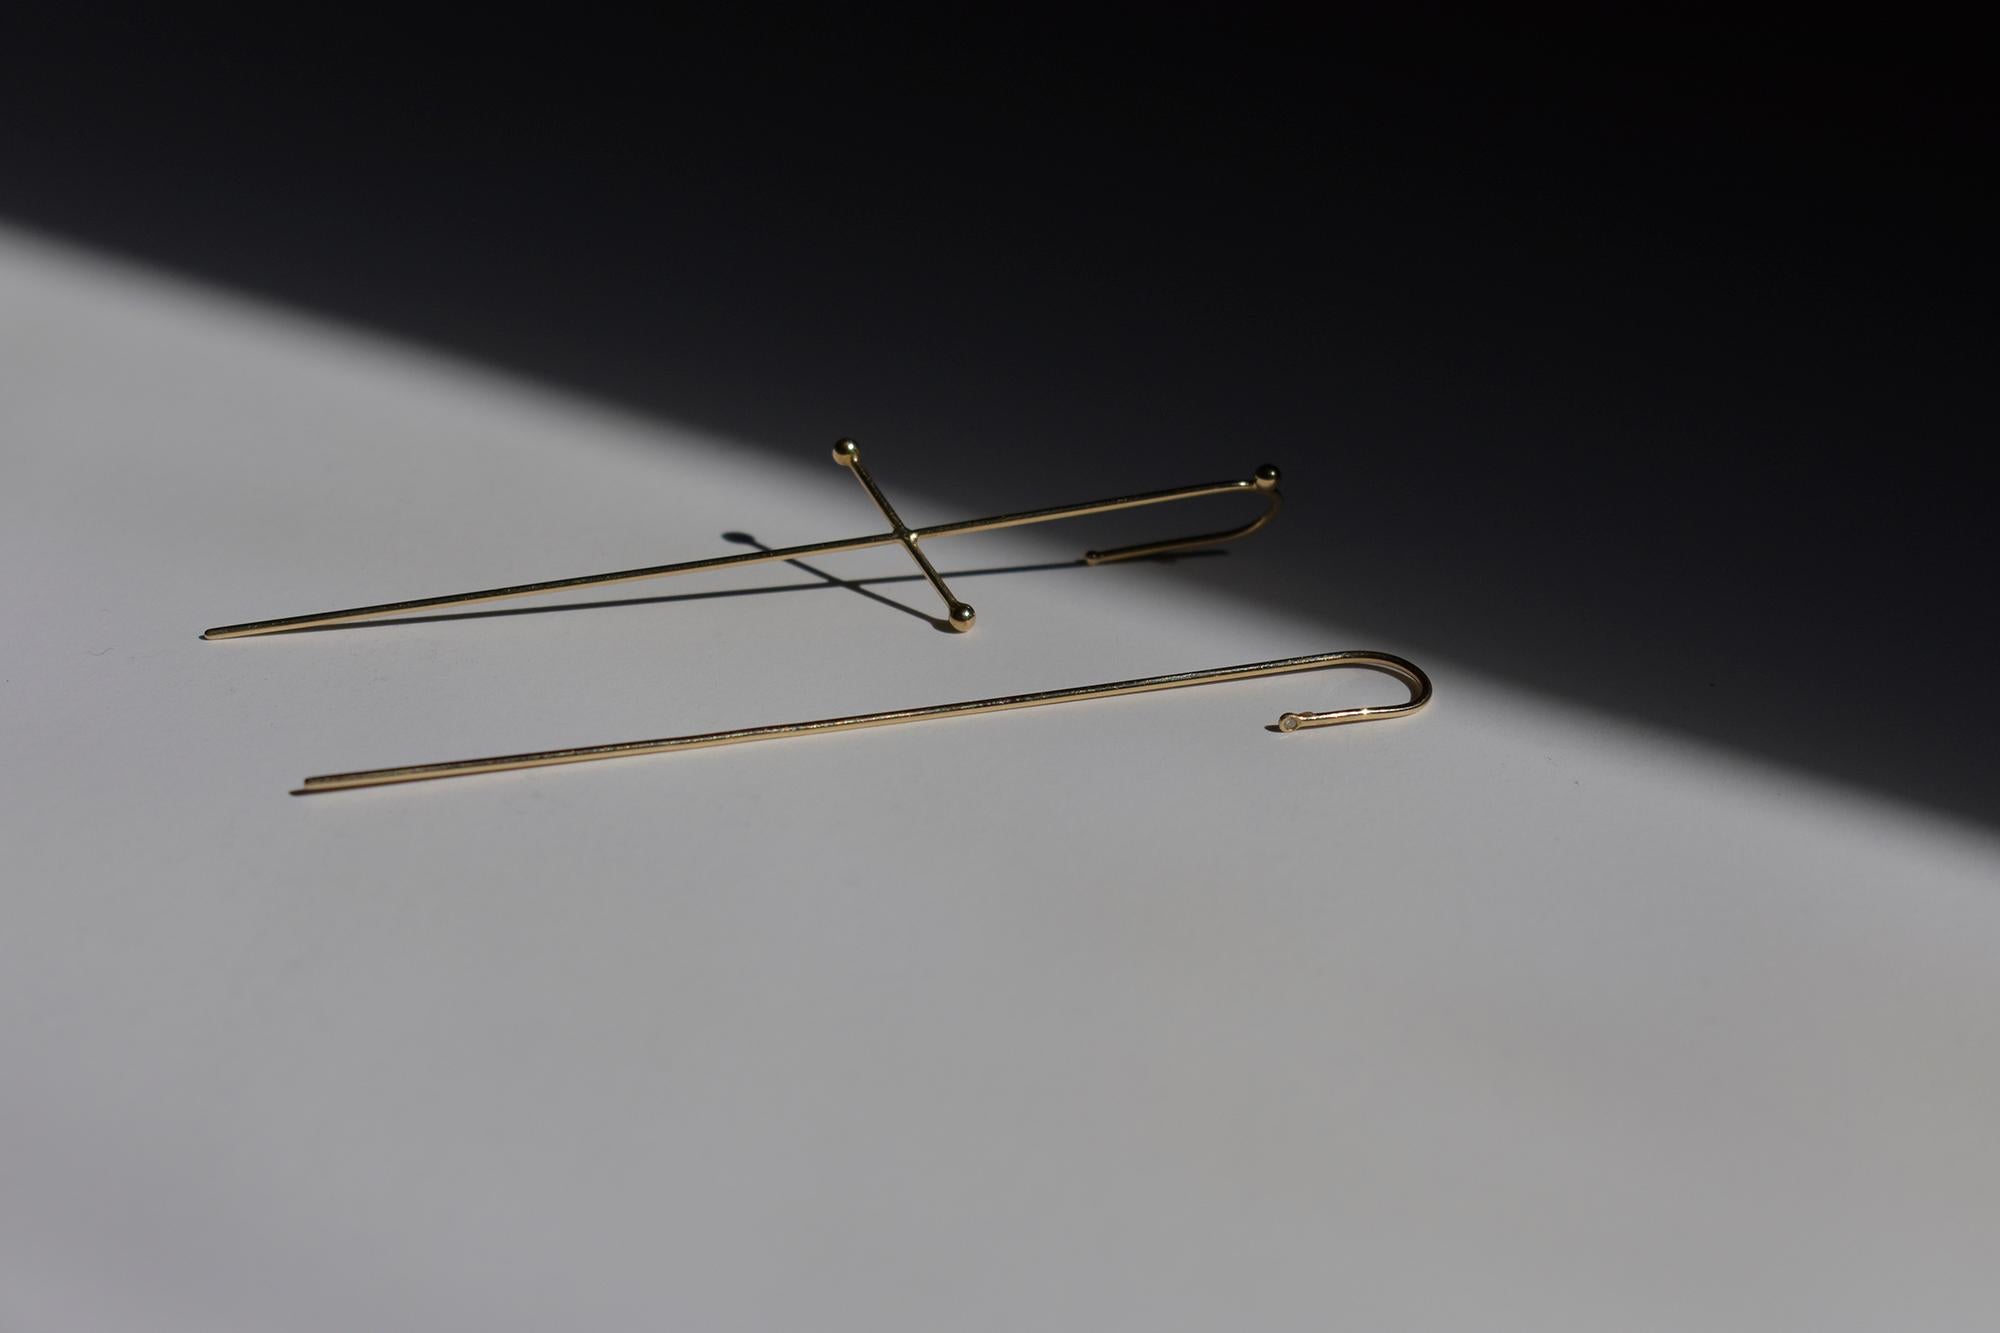 The first of its kind Needle Earring originated in 2016. The Master Needle Earring is the core element and original signature design of LABULGARA.

How to wear it: 

Thread the needle end through the ear lobe piercing and let the hook part cradle